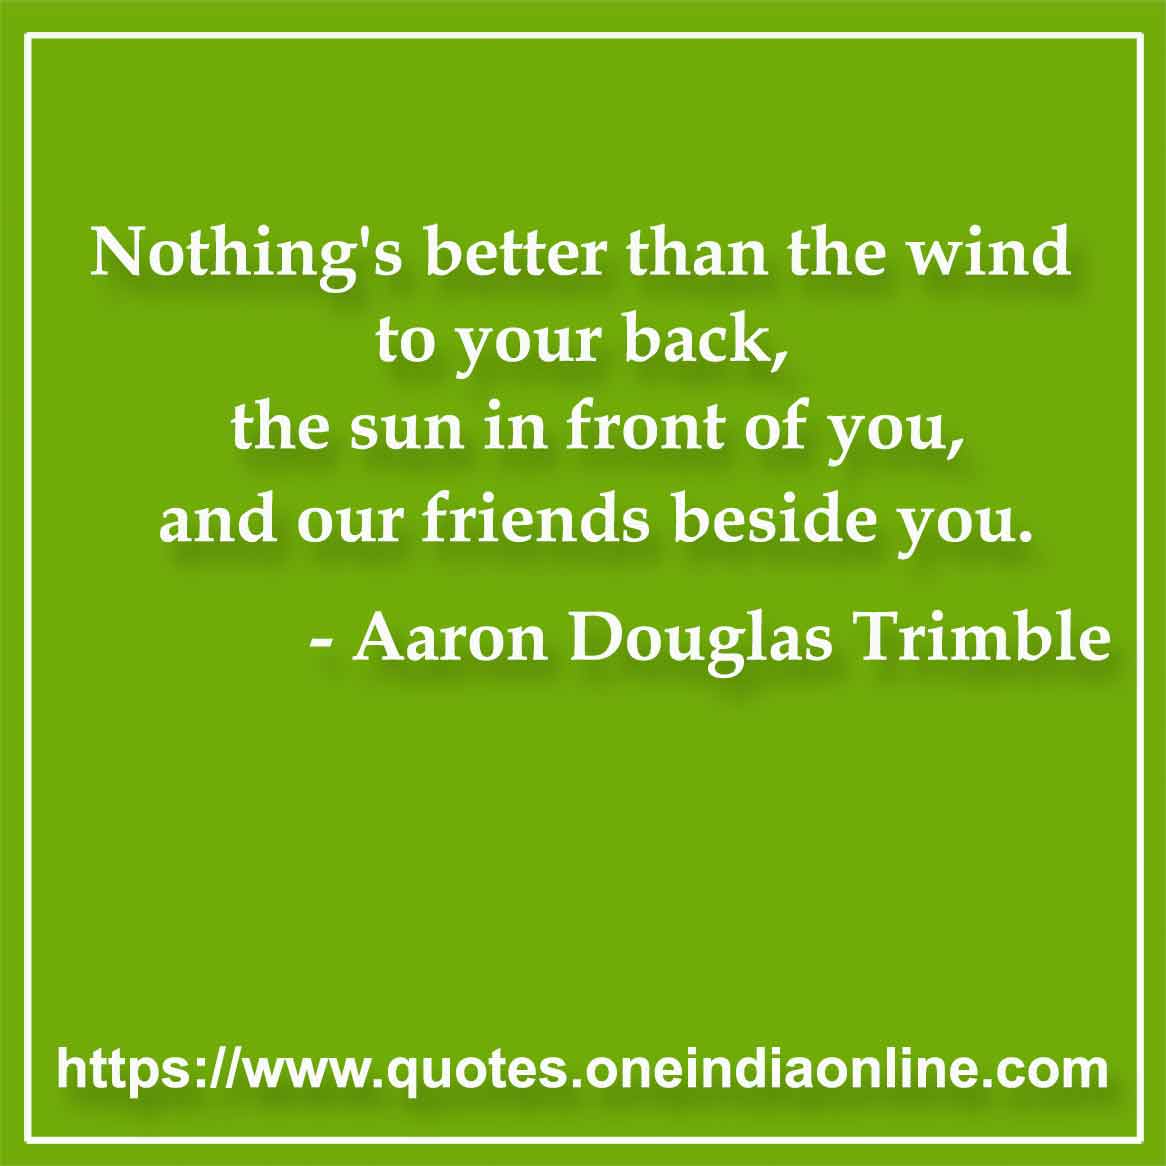 Nothing's better than the wind to your back, the sun in front of you, and our friends beside you.

- Exercise Quotes by Aaron Douglas Trimble